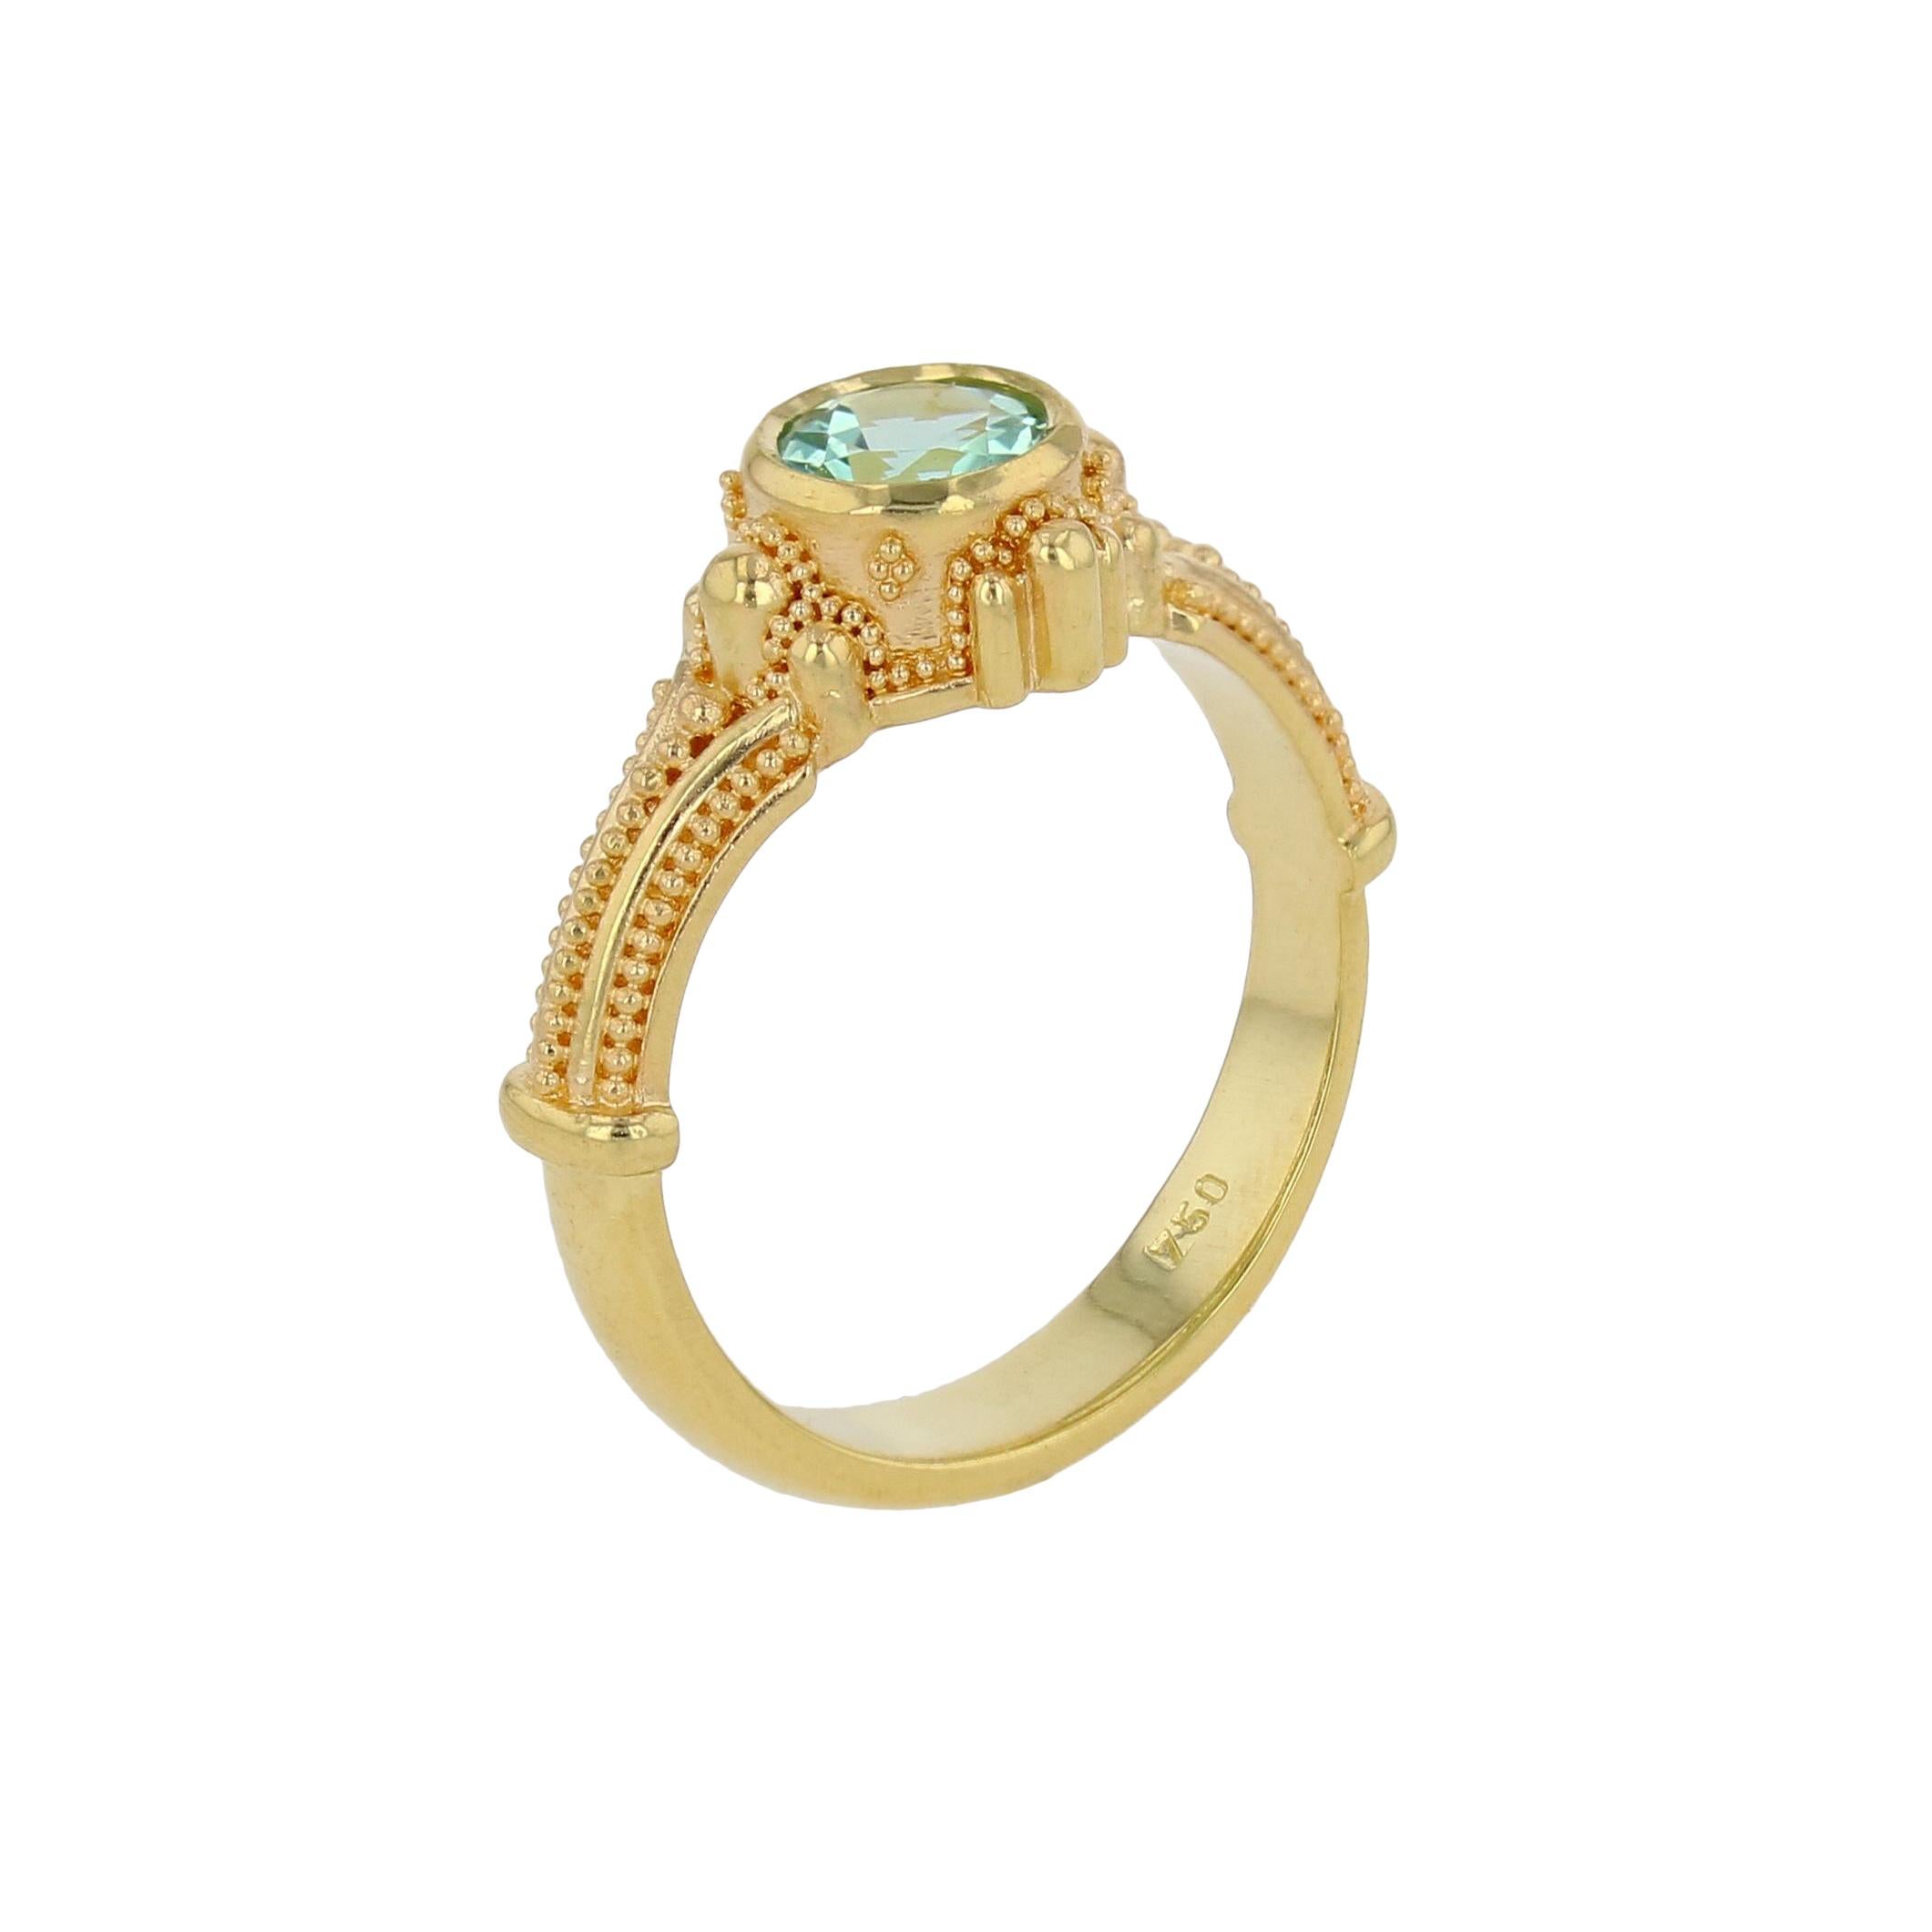 Kent Raible 18 Karat Gold Solitare Ring with Seafoam Tourmaline and Granulation For Sale 1